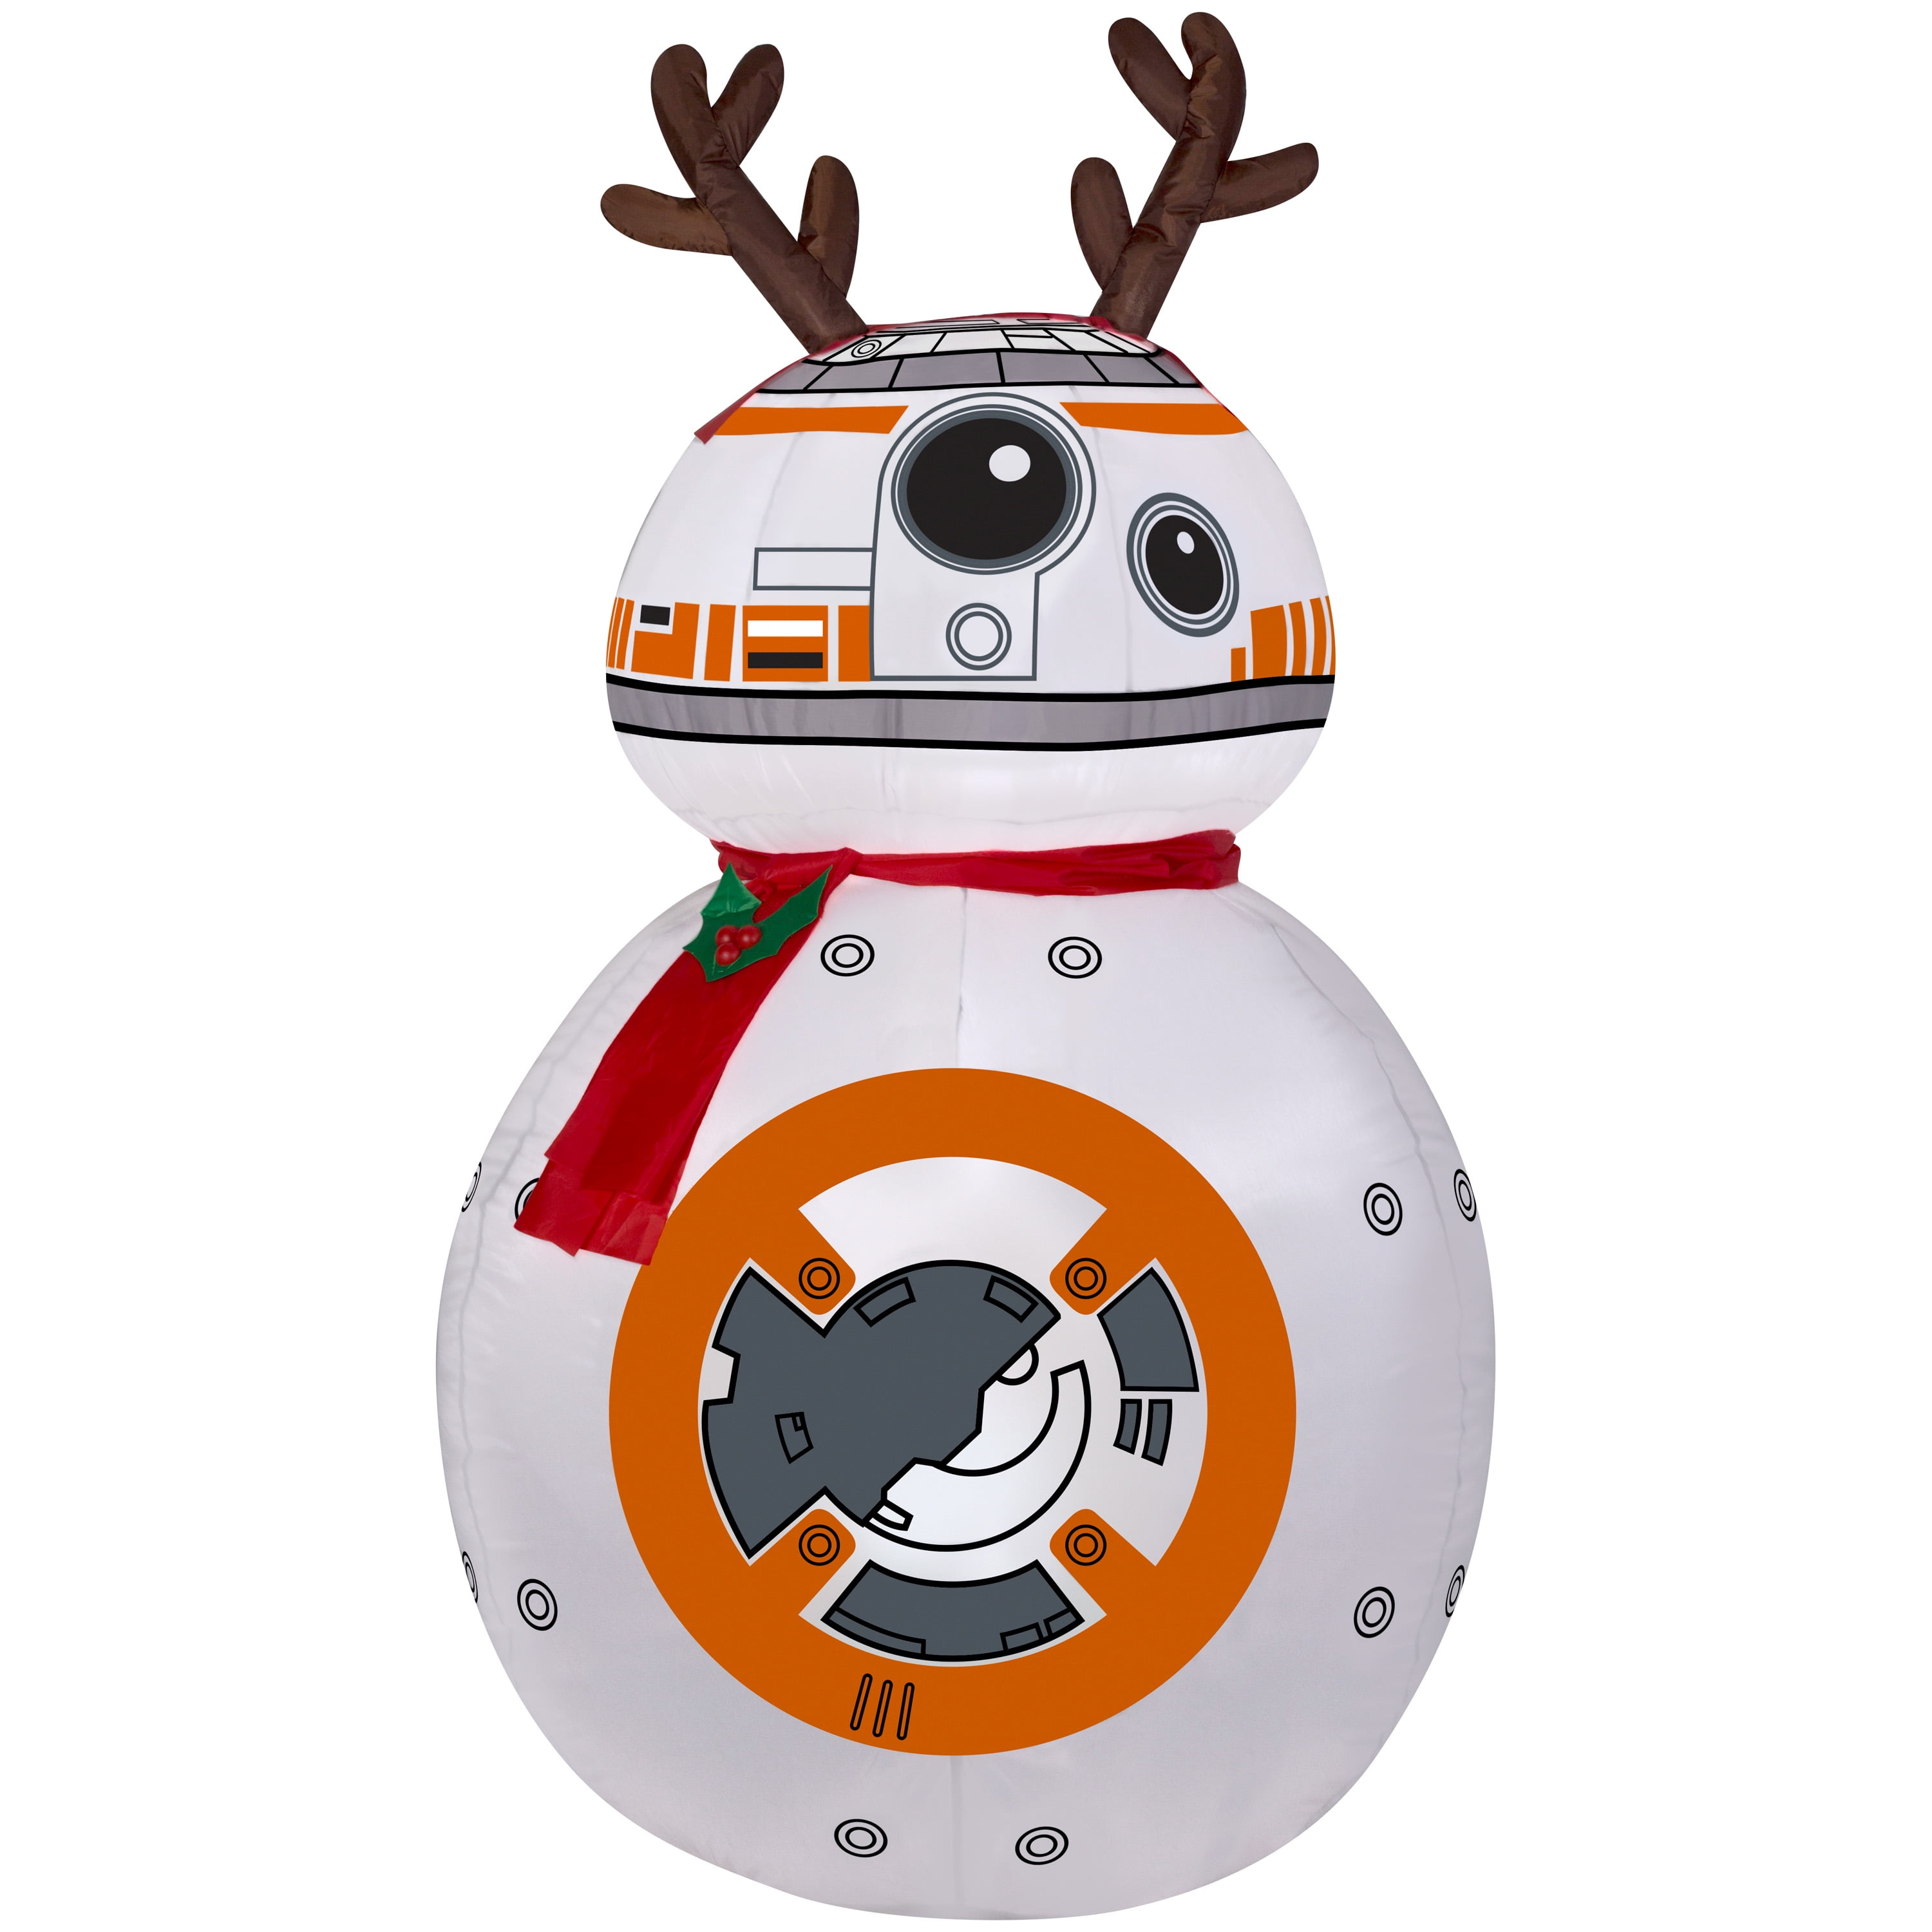 Disney Star wars BB-8  airblown inflatable 3.5 ft  lighted christmas decoration 